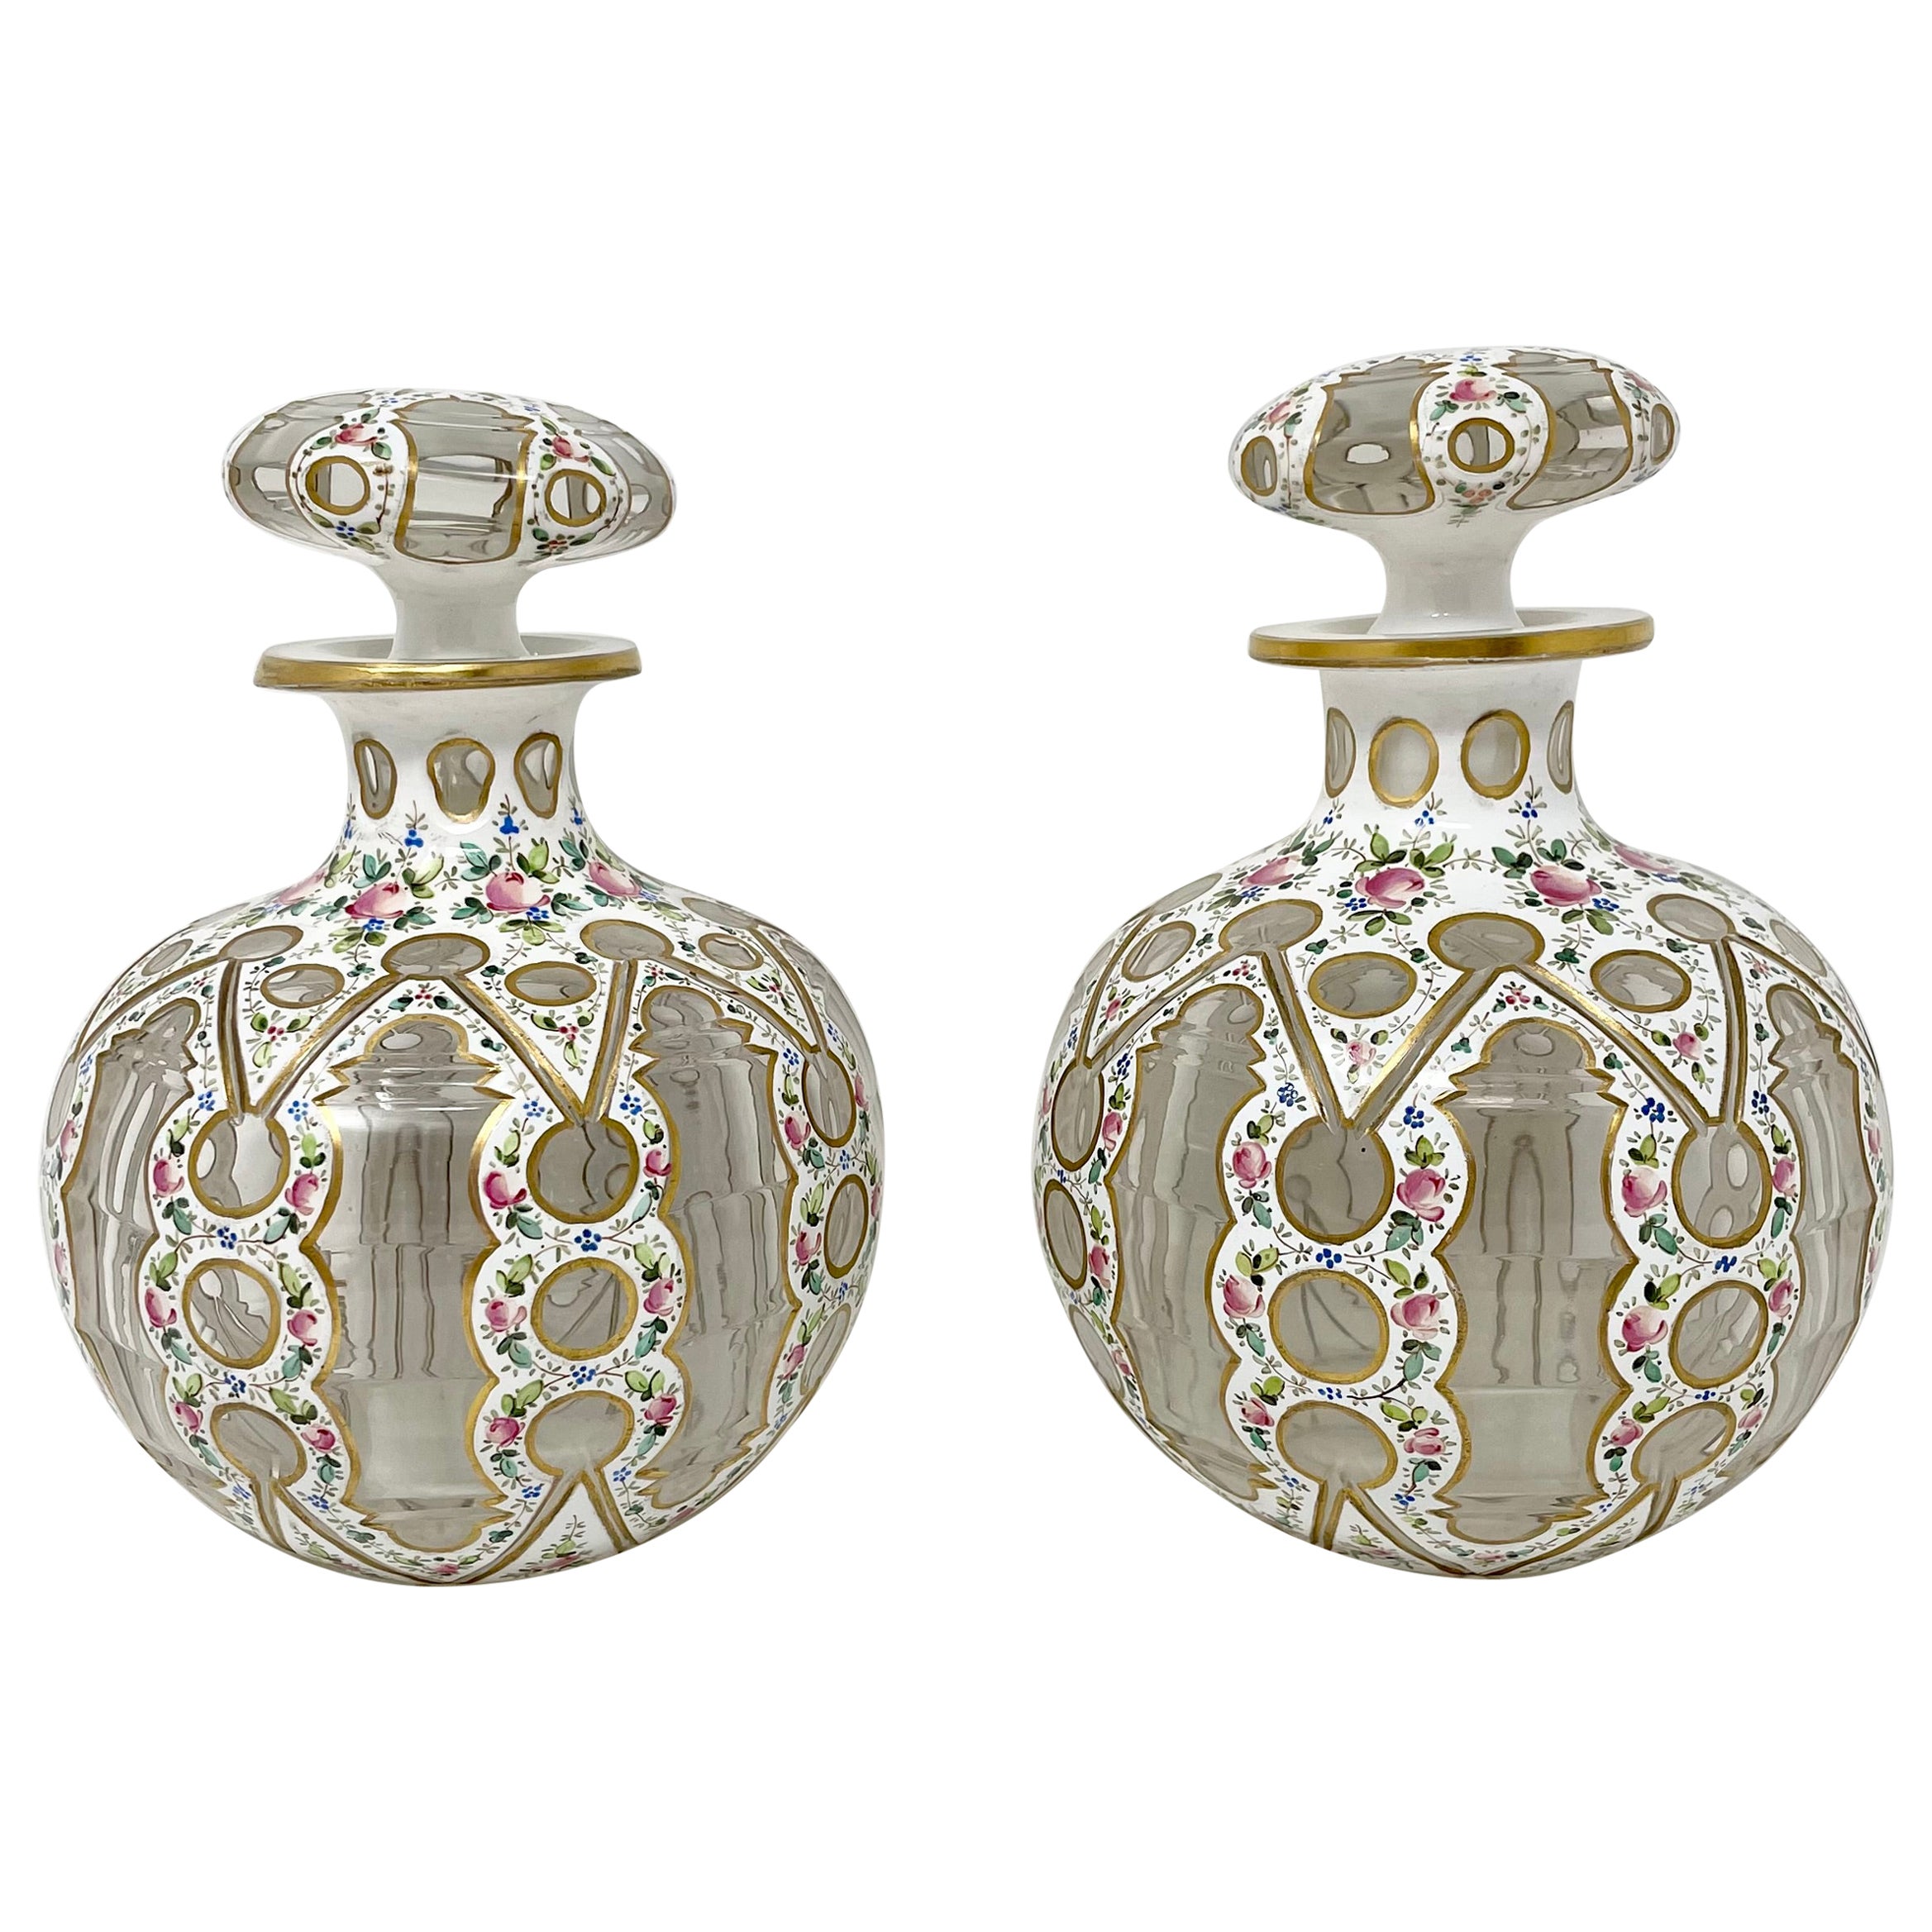 Pair Antique French Enameled Porcelain & Glass Perfume Bottles, Circa 1860-1870. For Sale